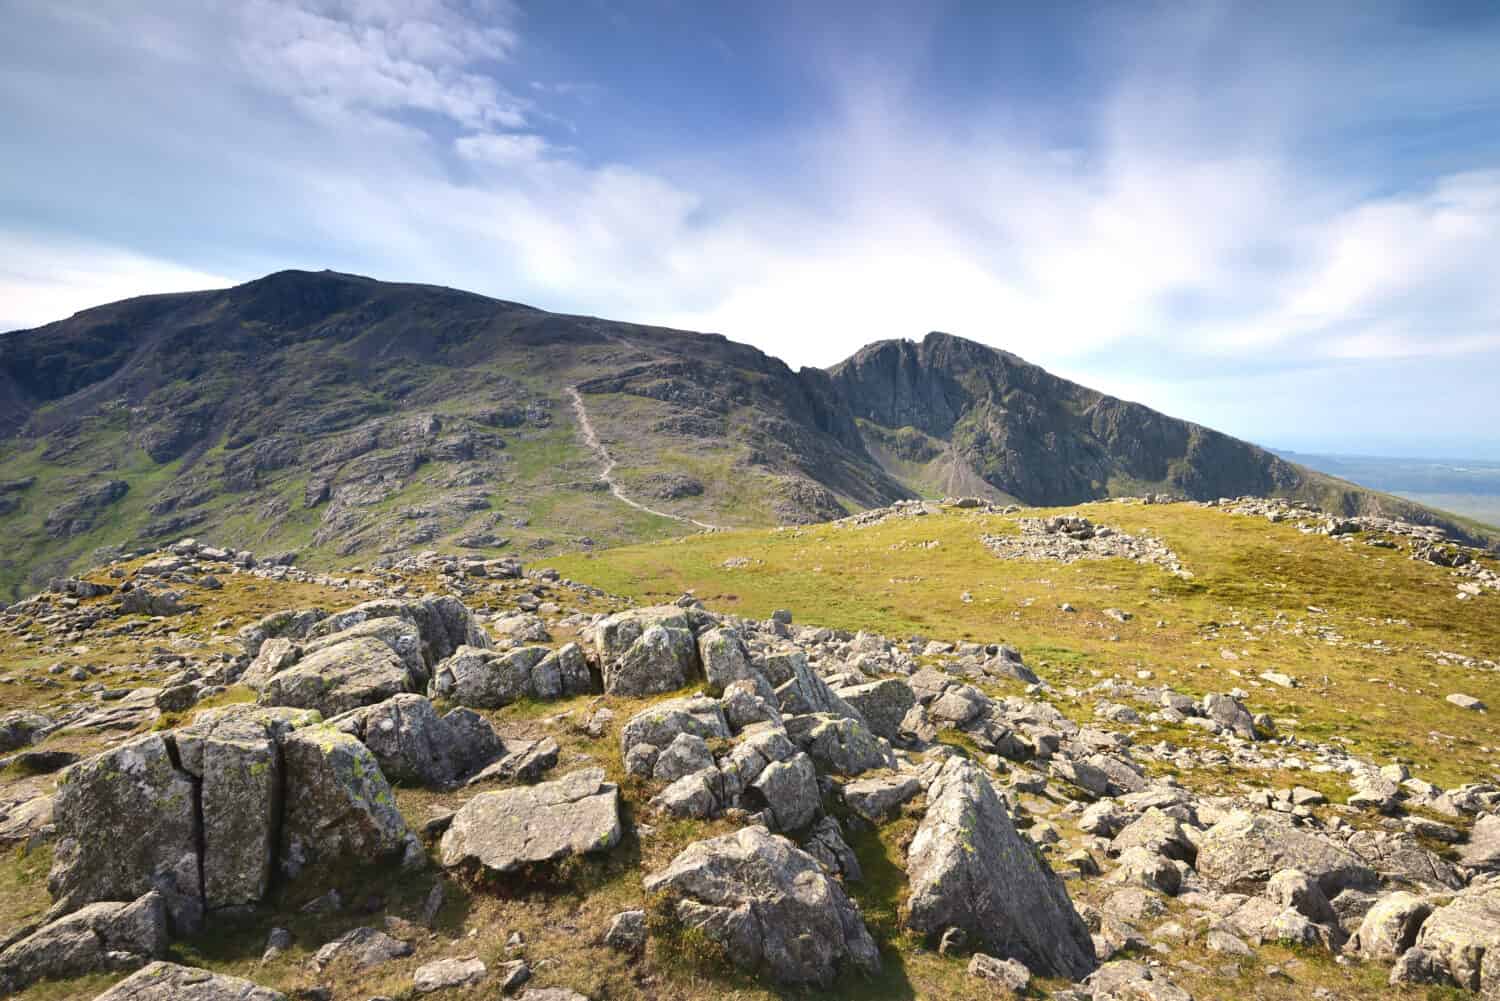 The ridge from England's tallest mountain, Scafell Pike to Sca Fell